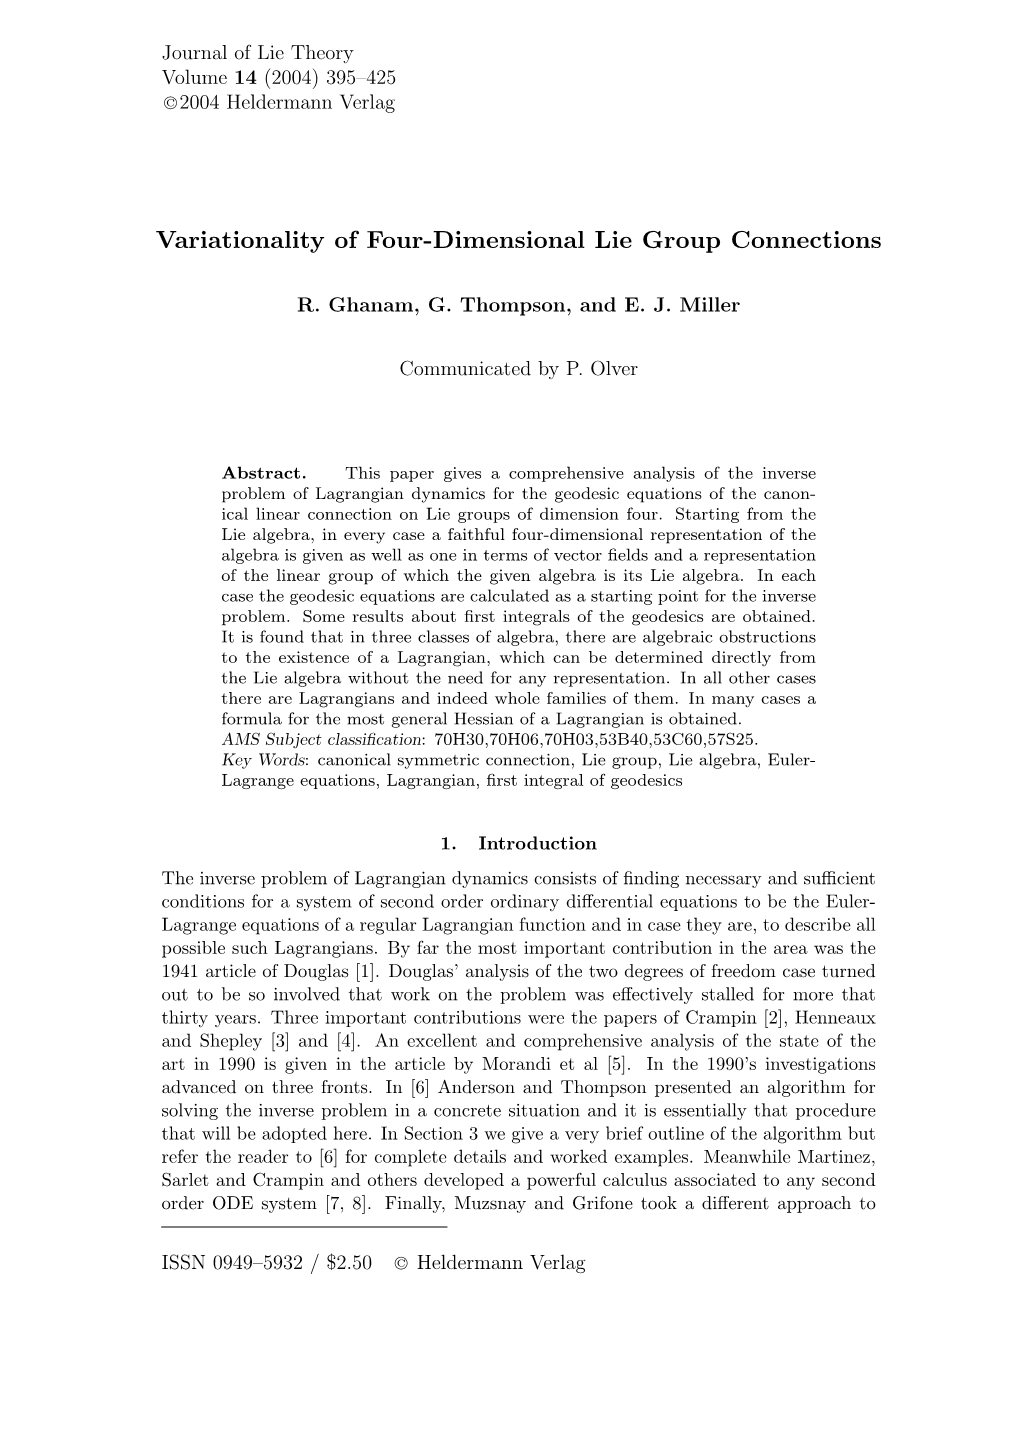 Variationality of Four-Dimensional Lie Group Connections